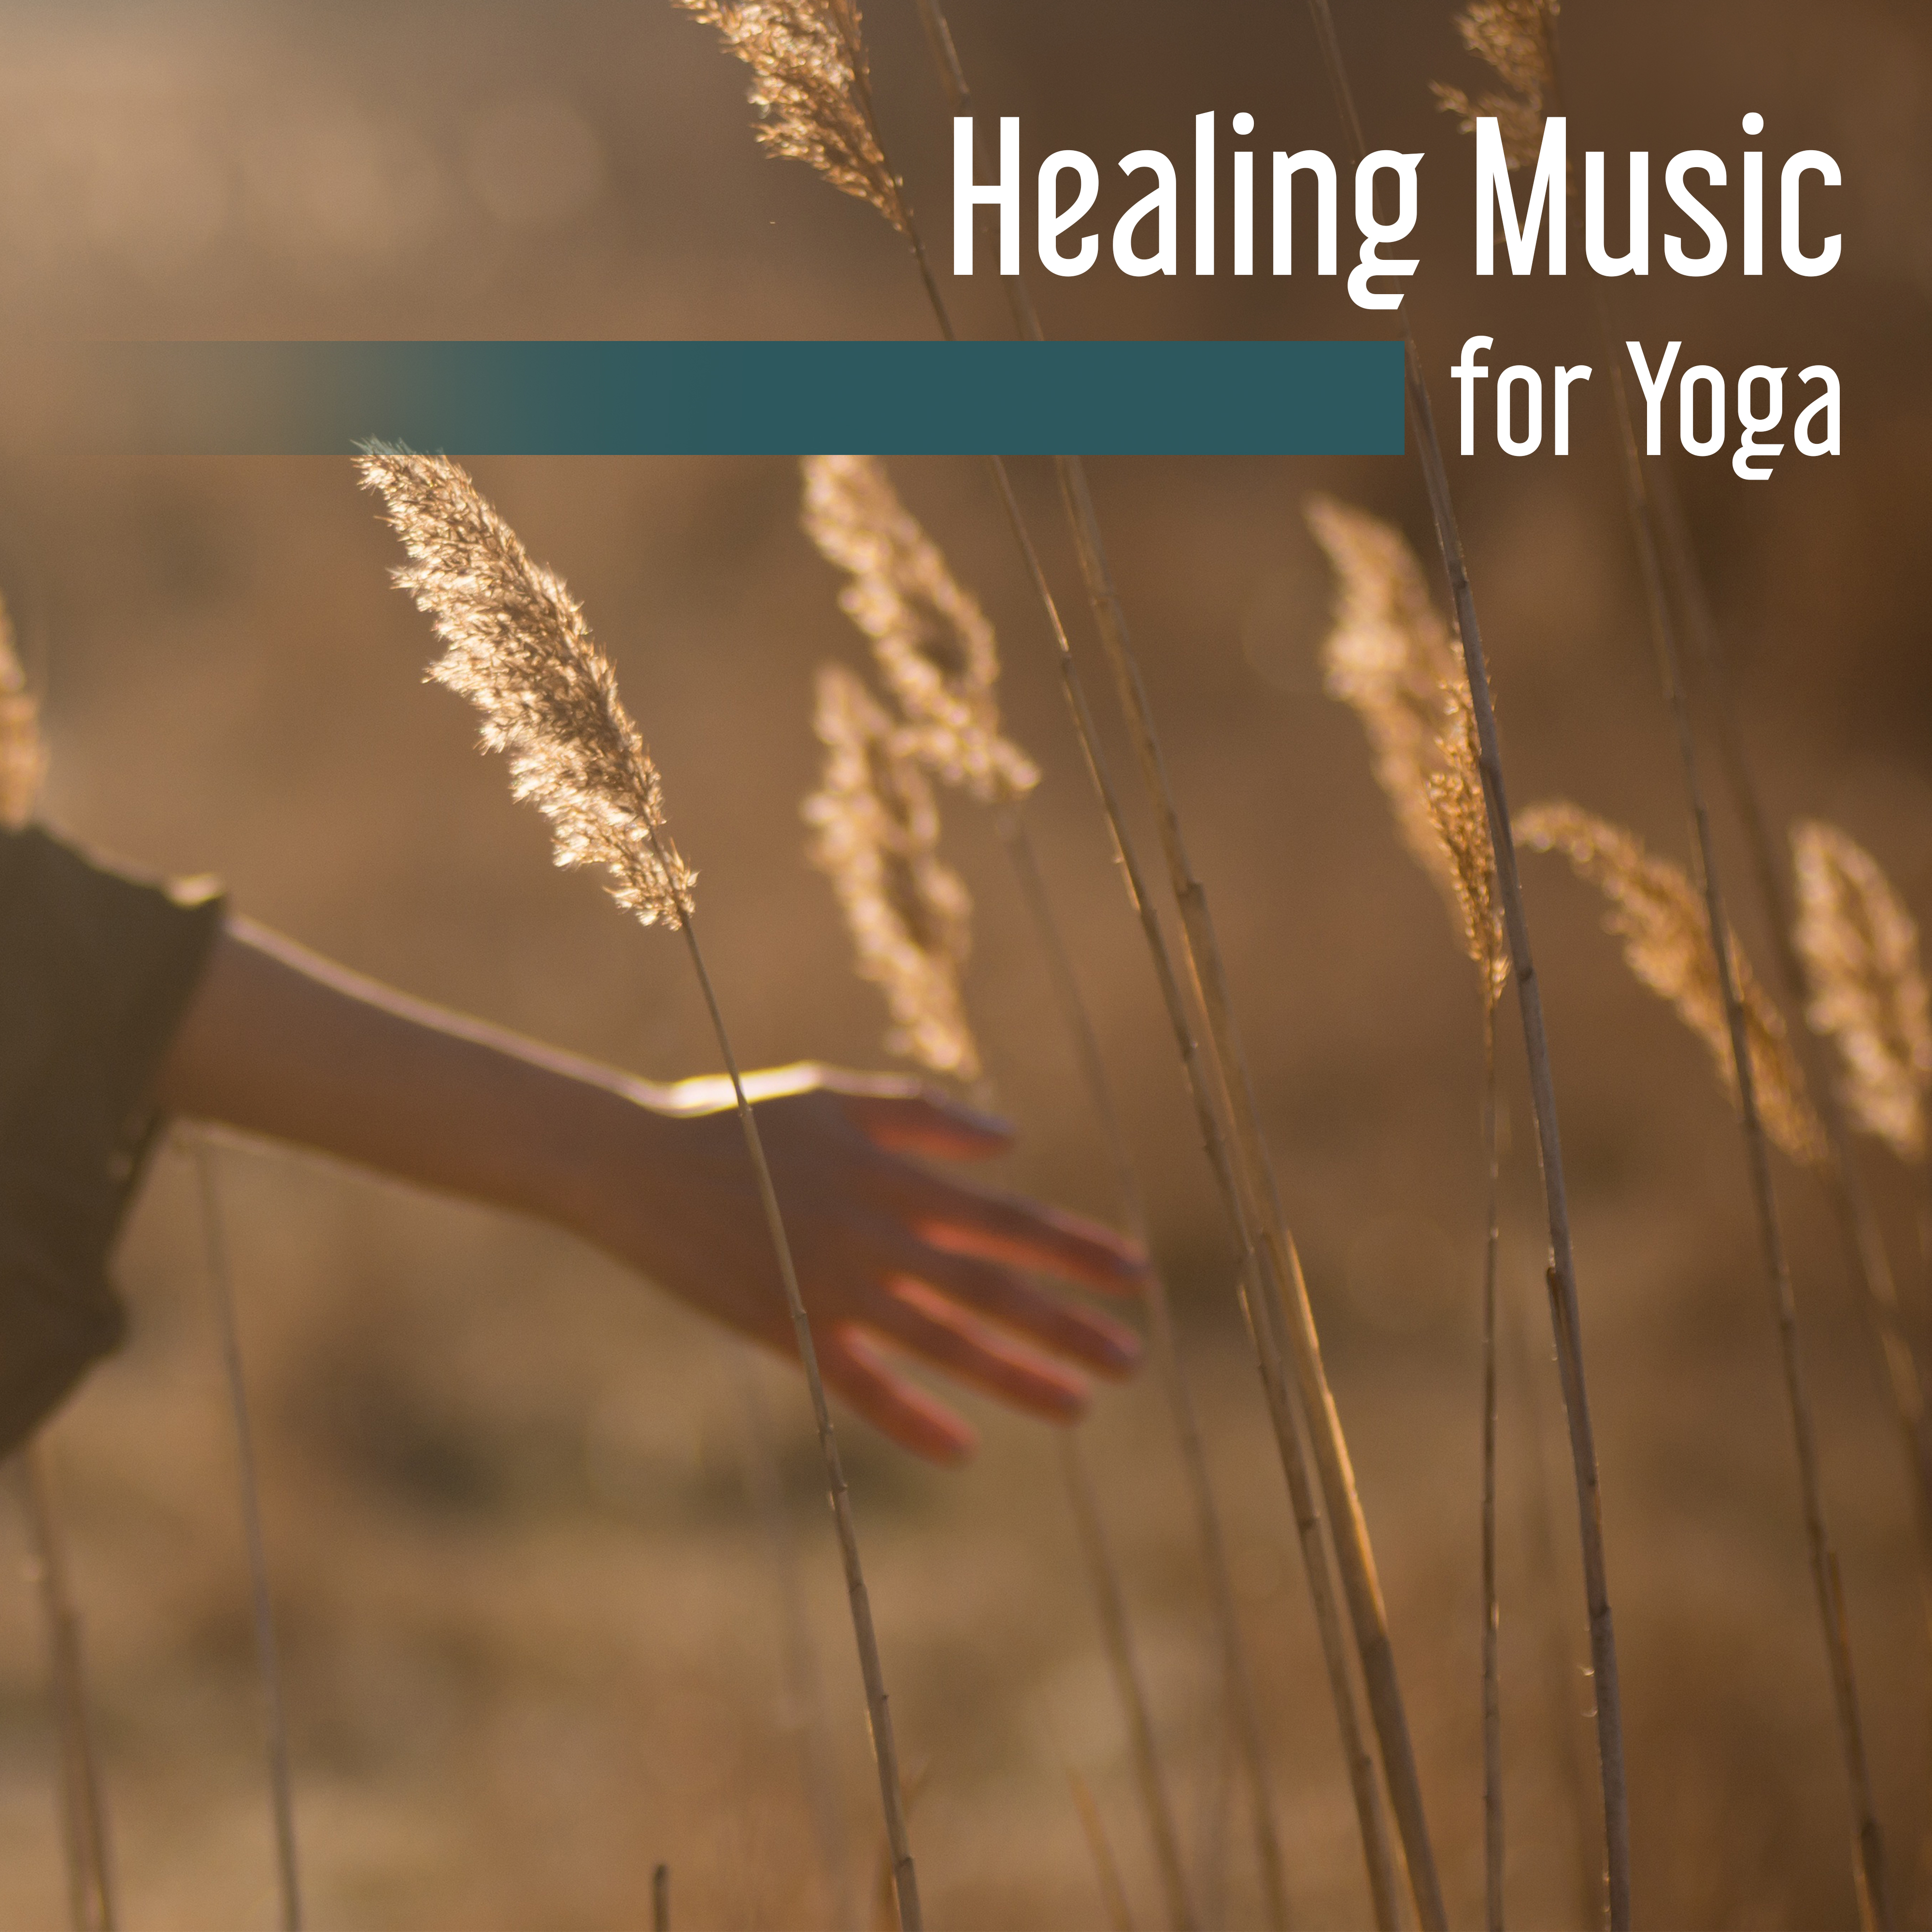 Healing Music for Yoga – Train Your Mind, Better Concentration, Calming Melodies for Meditation, Zen, Focus, Nature Sounds